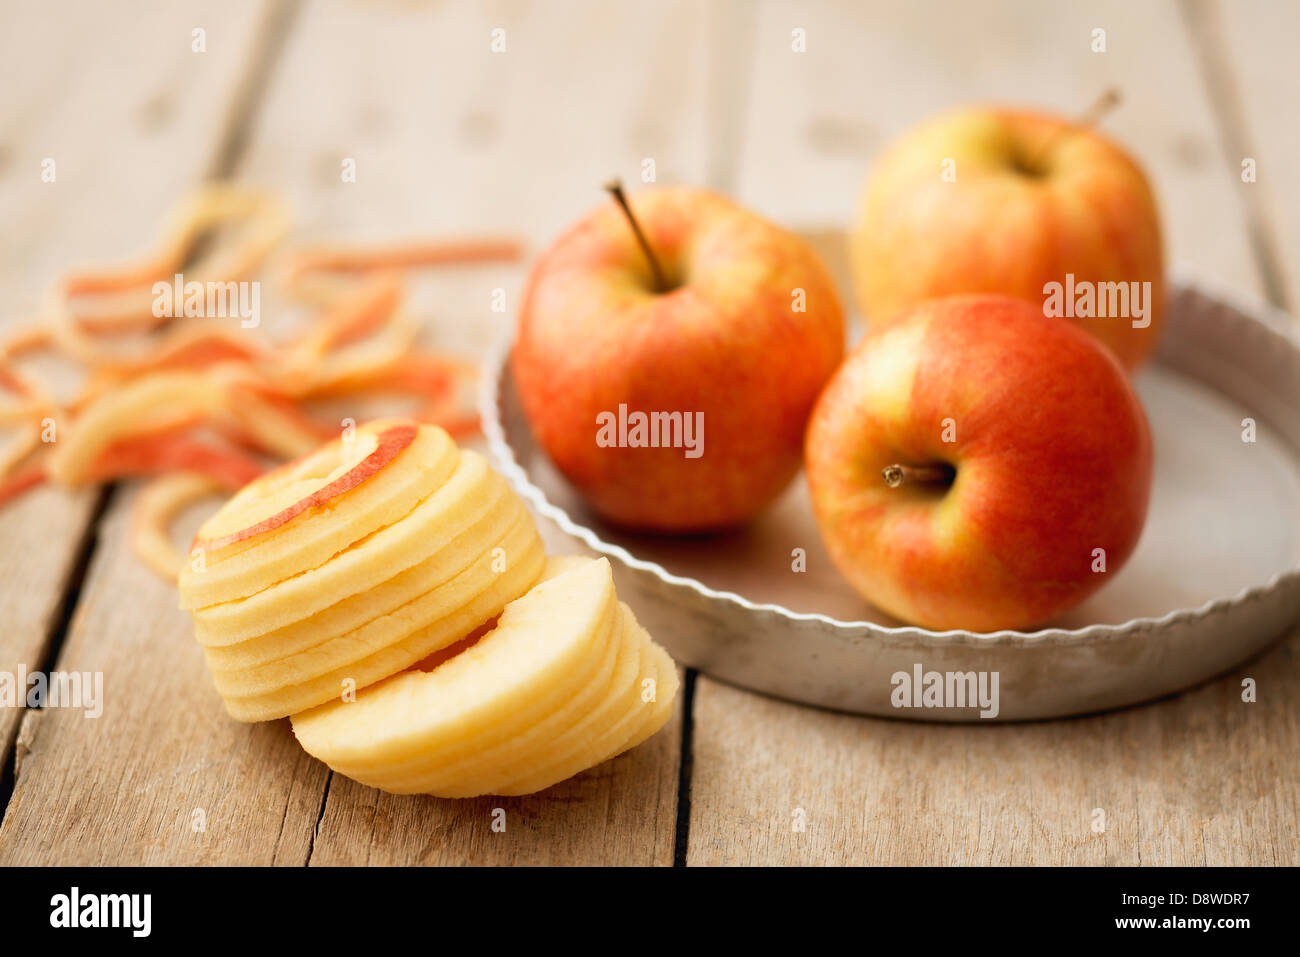 Peeling and slicing apples for a tart Stock Photo